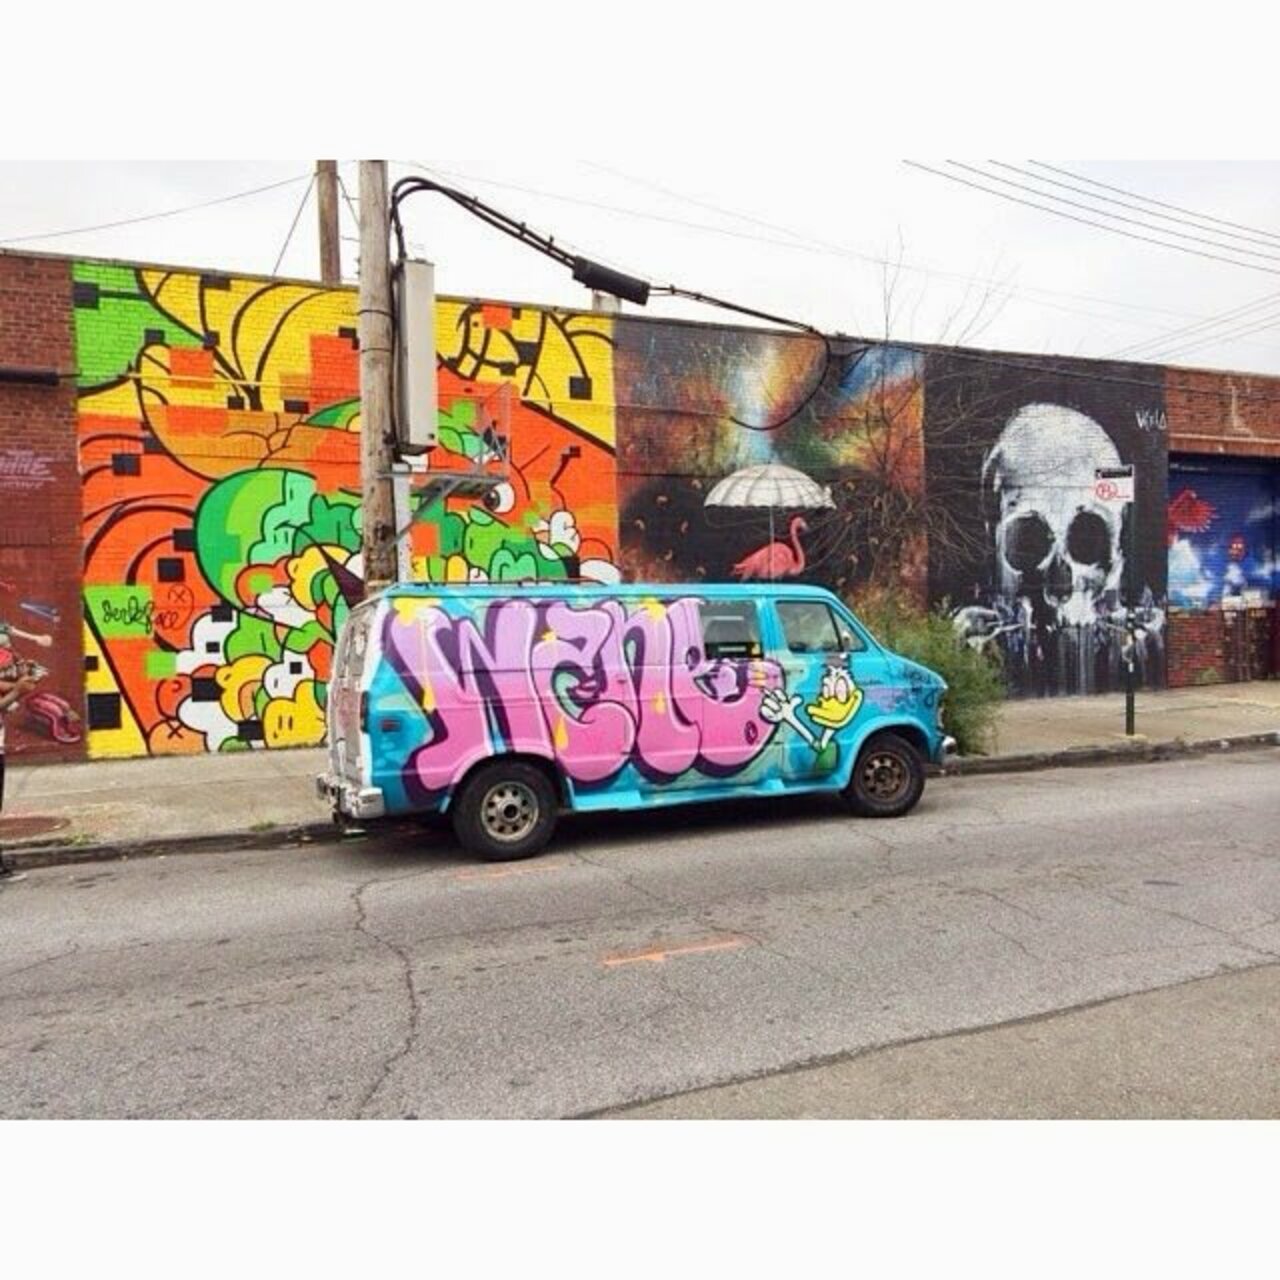 I saw this van in #brooklyn . Does anyone know of the #artist ? #streetart #graffiti https://t.co/MNoCSGn9Ci